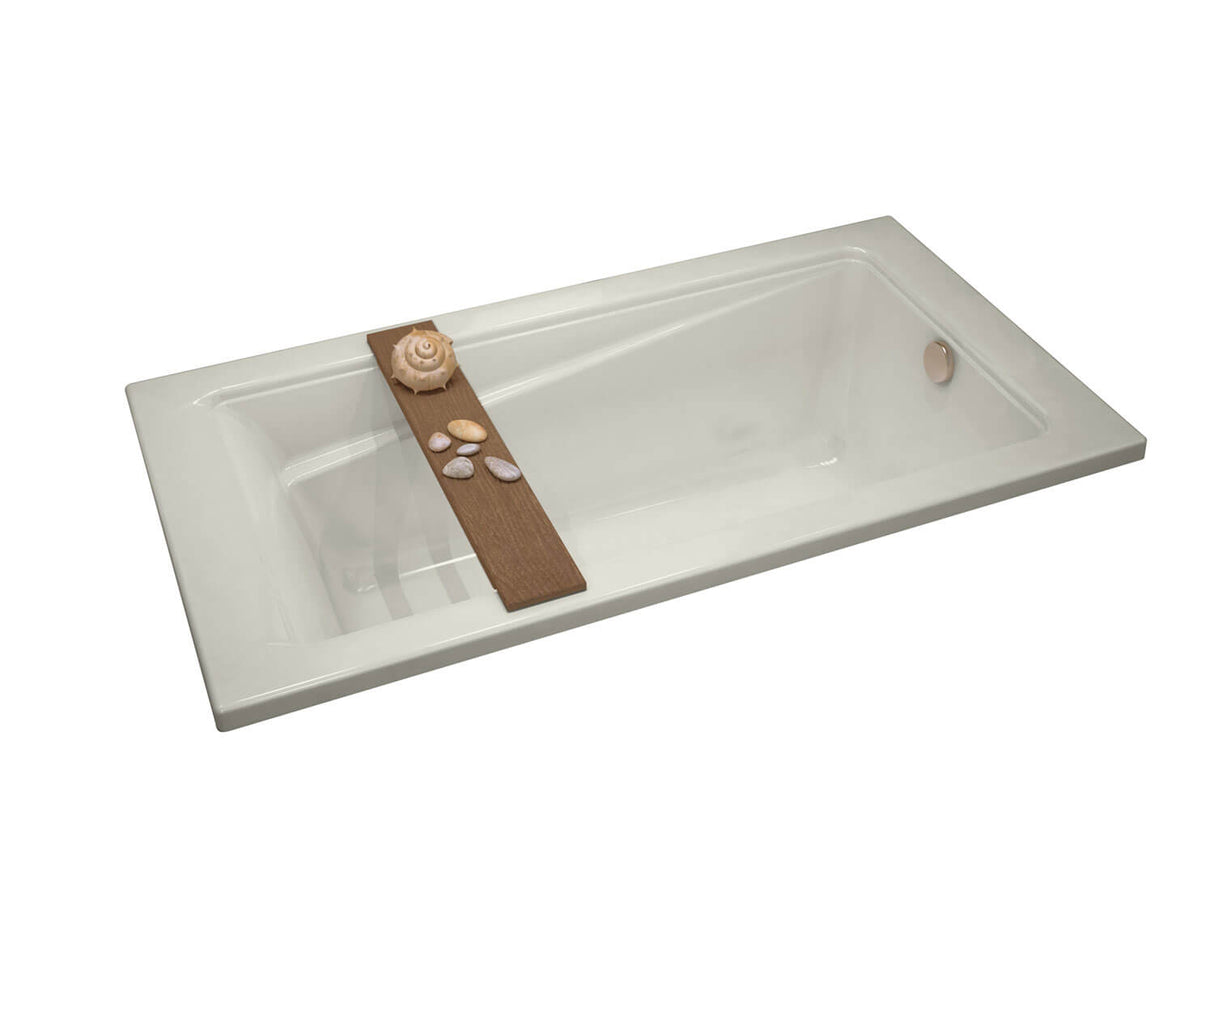 MAAX 106250-002-007 Exhibit 6042 Acrylic Drop-in End Drain Bathtub in Biscuit - Product Pack